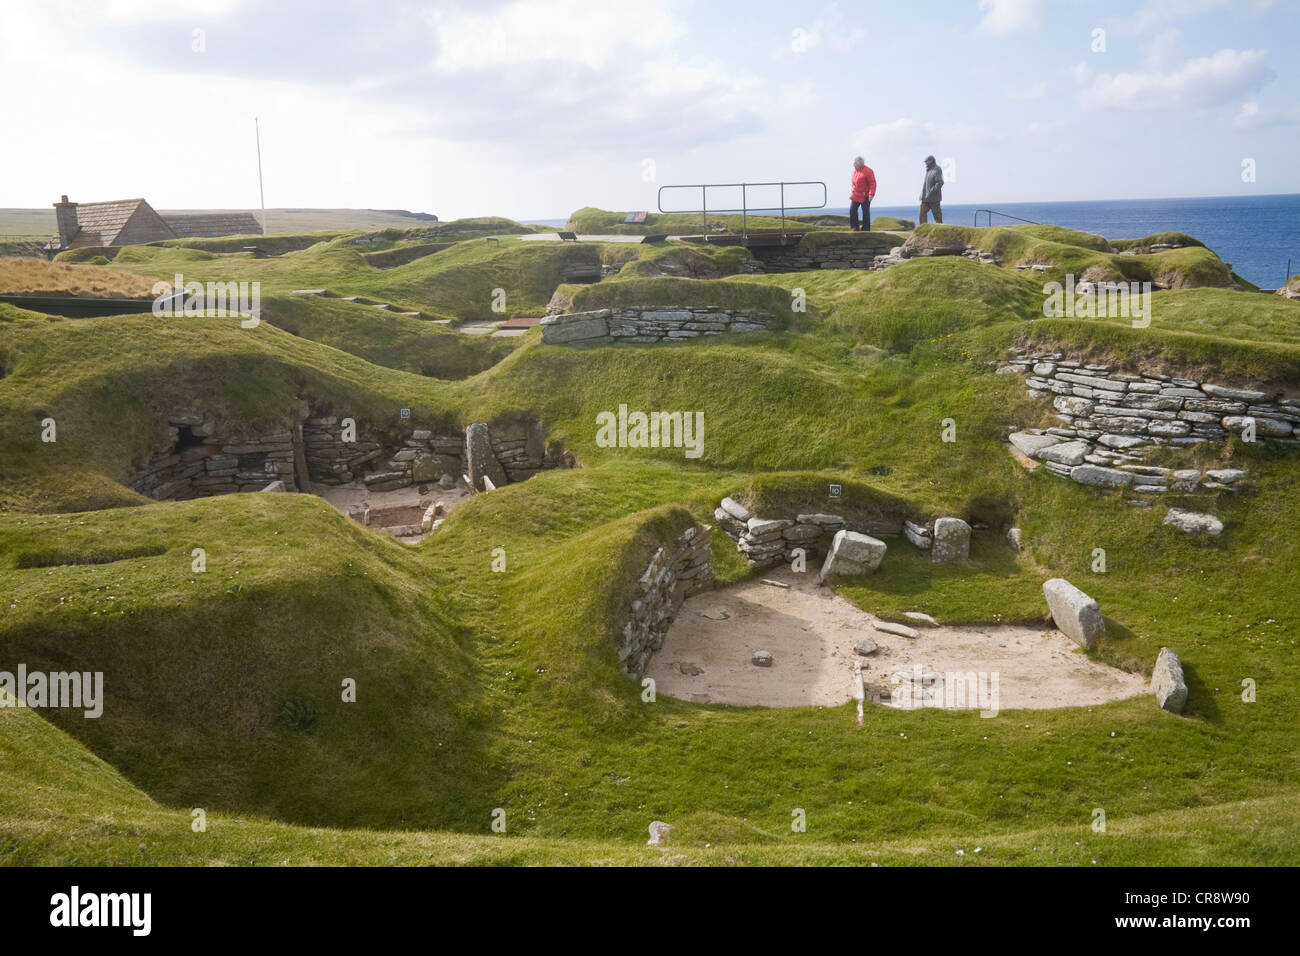 Bay of Skaill Orkney West Mainland Stone age huts built from unmortared stone in Skara Brae Neolithic village linked by passages Stock Photo